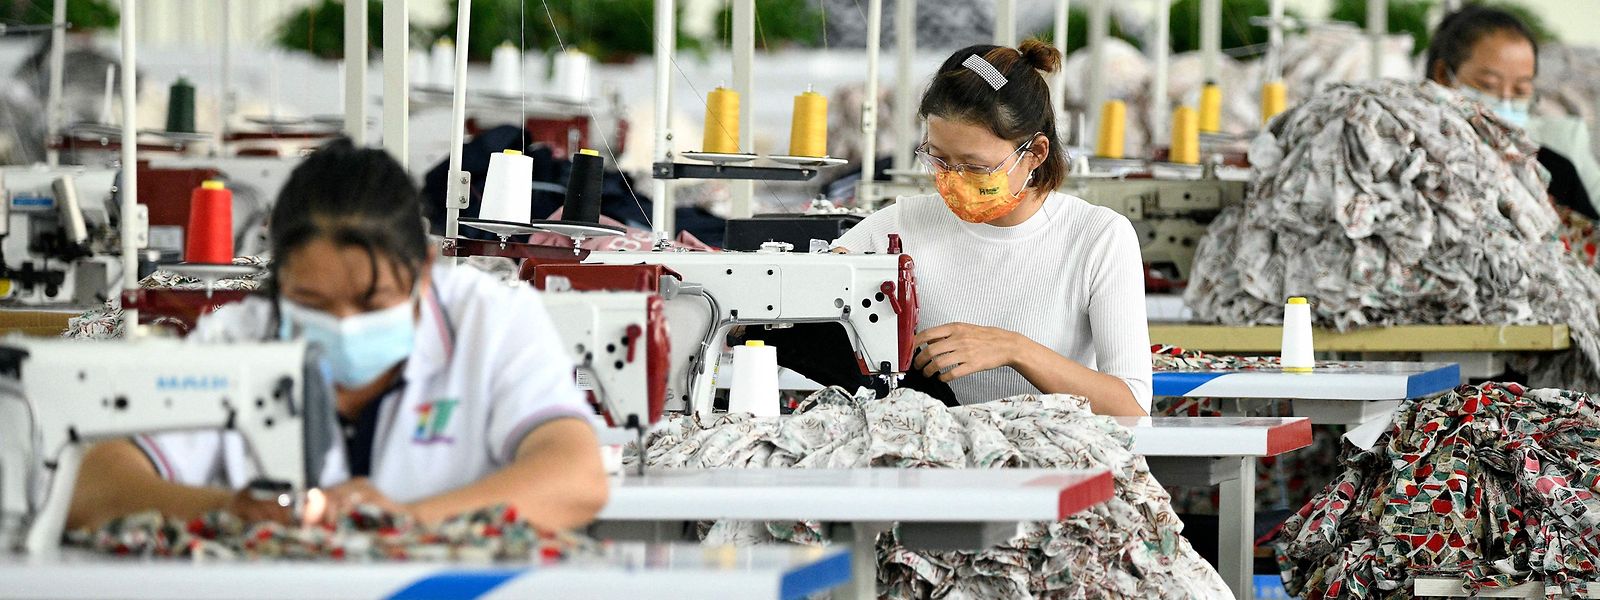 This photo taken on September 21, 2022 shows employees working at a textile factory in Anlong in China's southwestern Guizhou province. (Photo by AFP) / China OUT